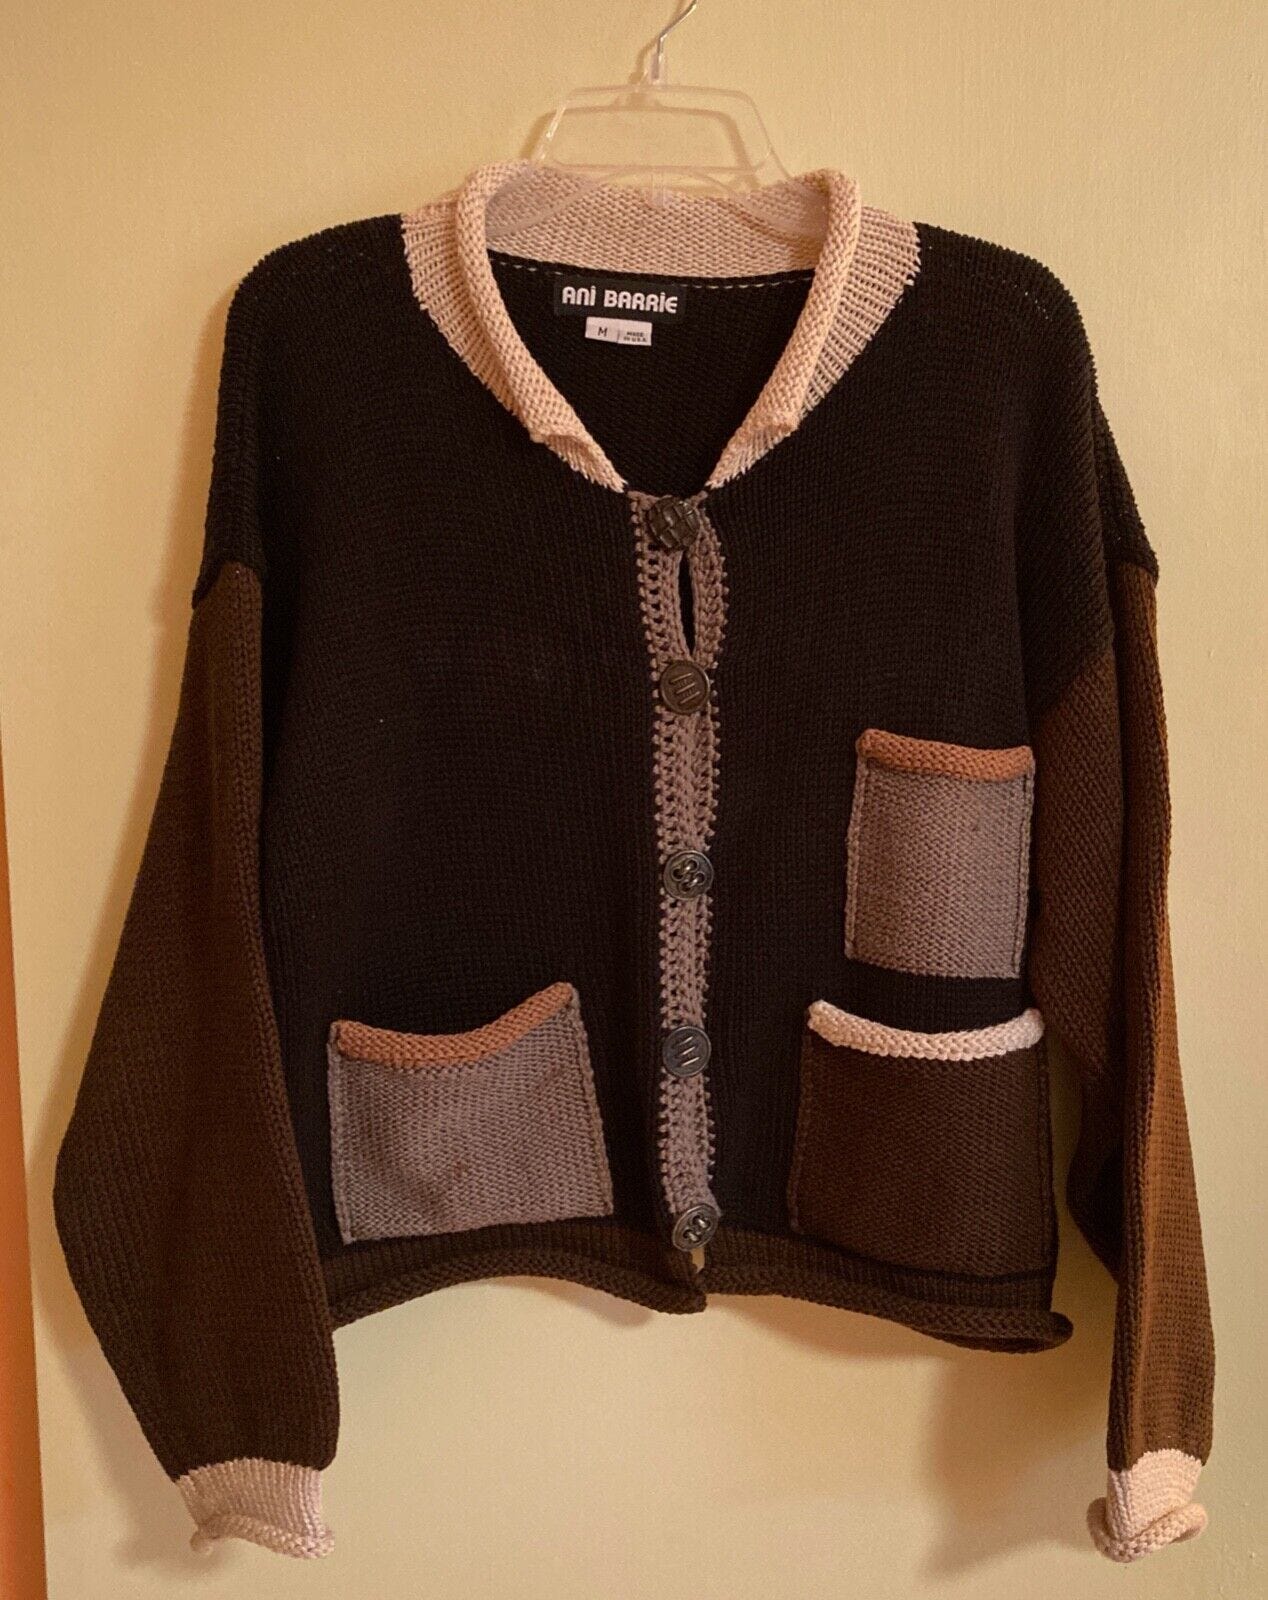 Ani Barrie Sweater - Black / Brown / Grey / Cream - Medium - Picture 1 of 2